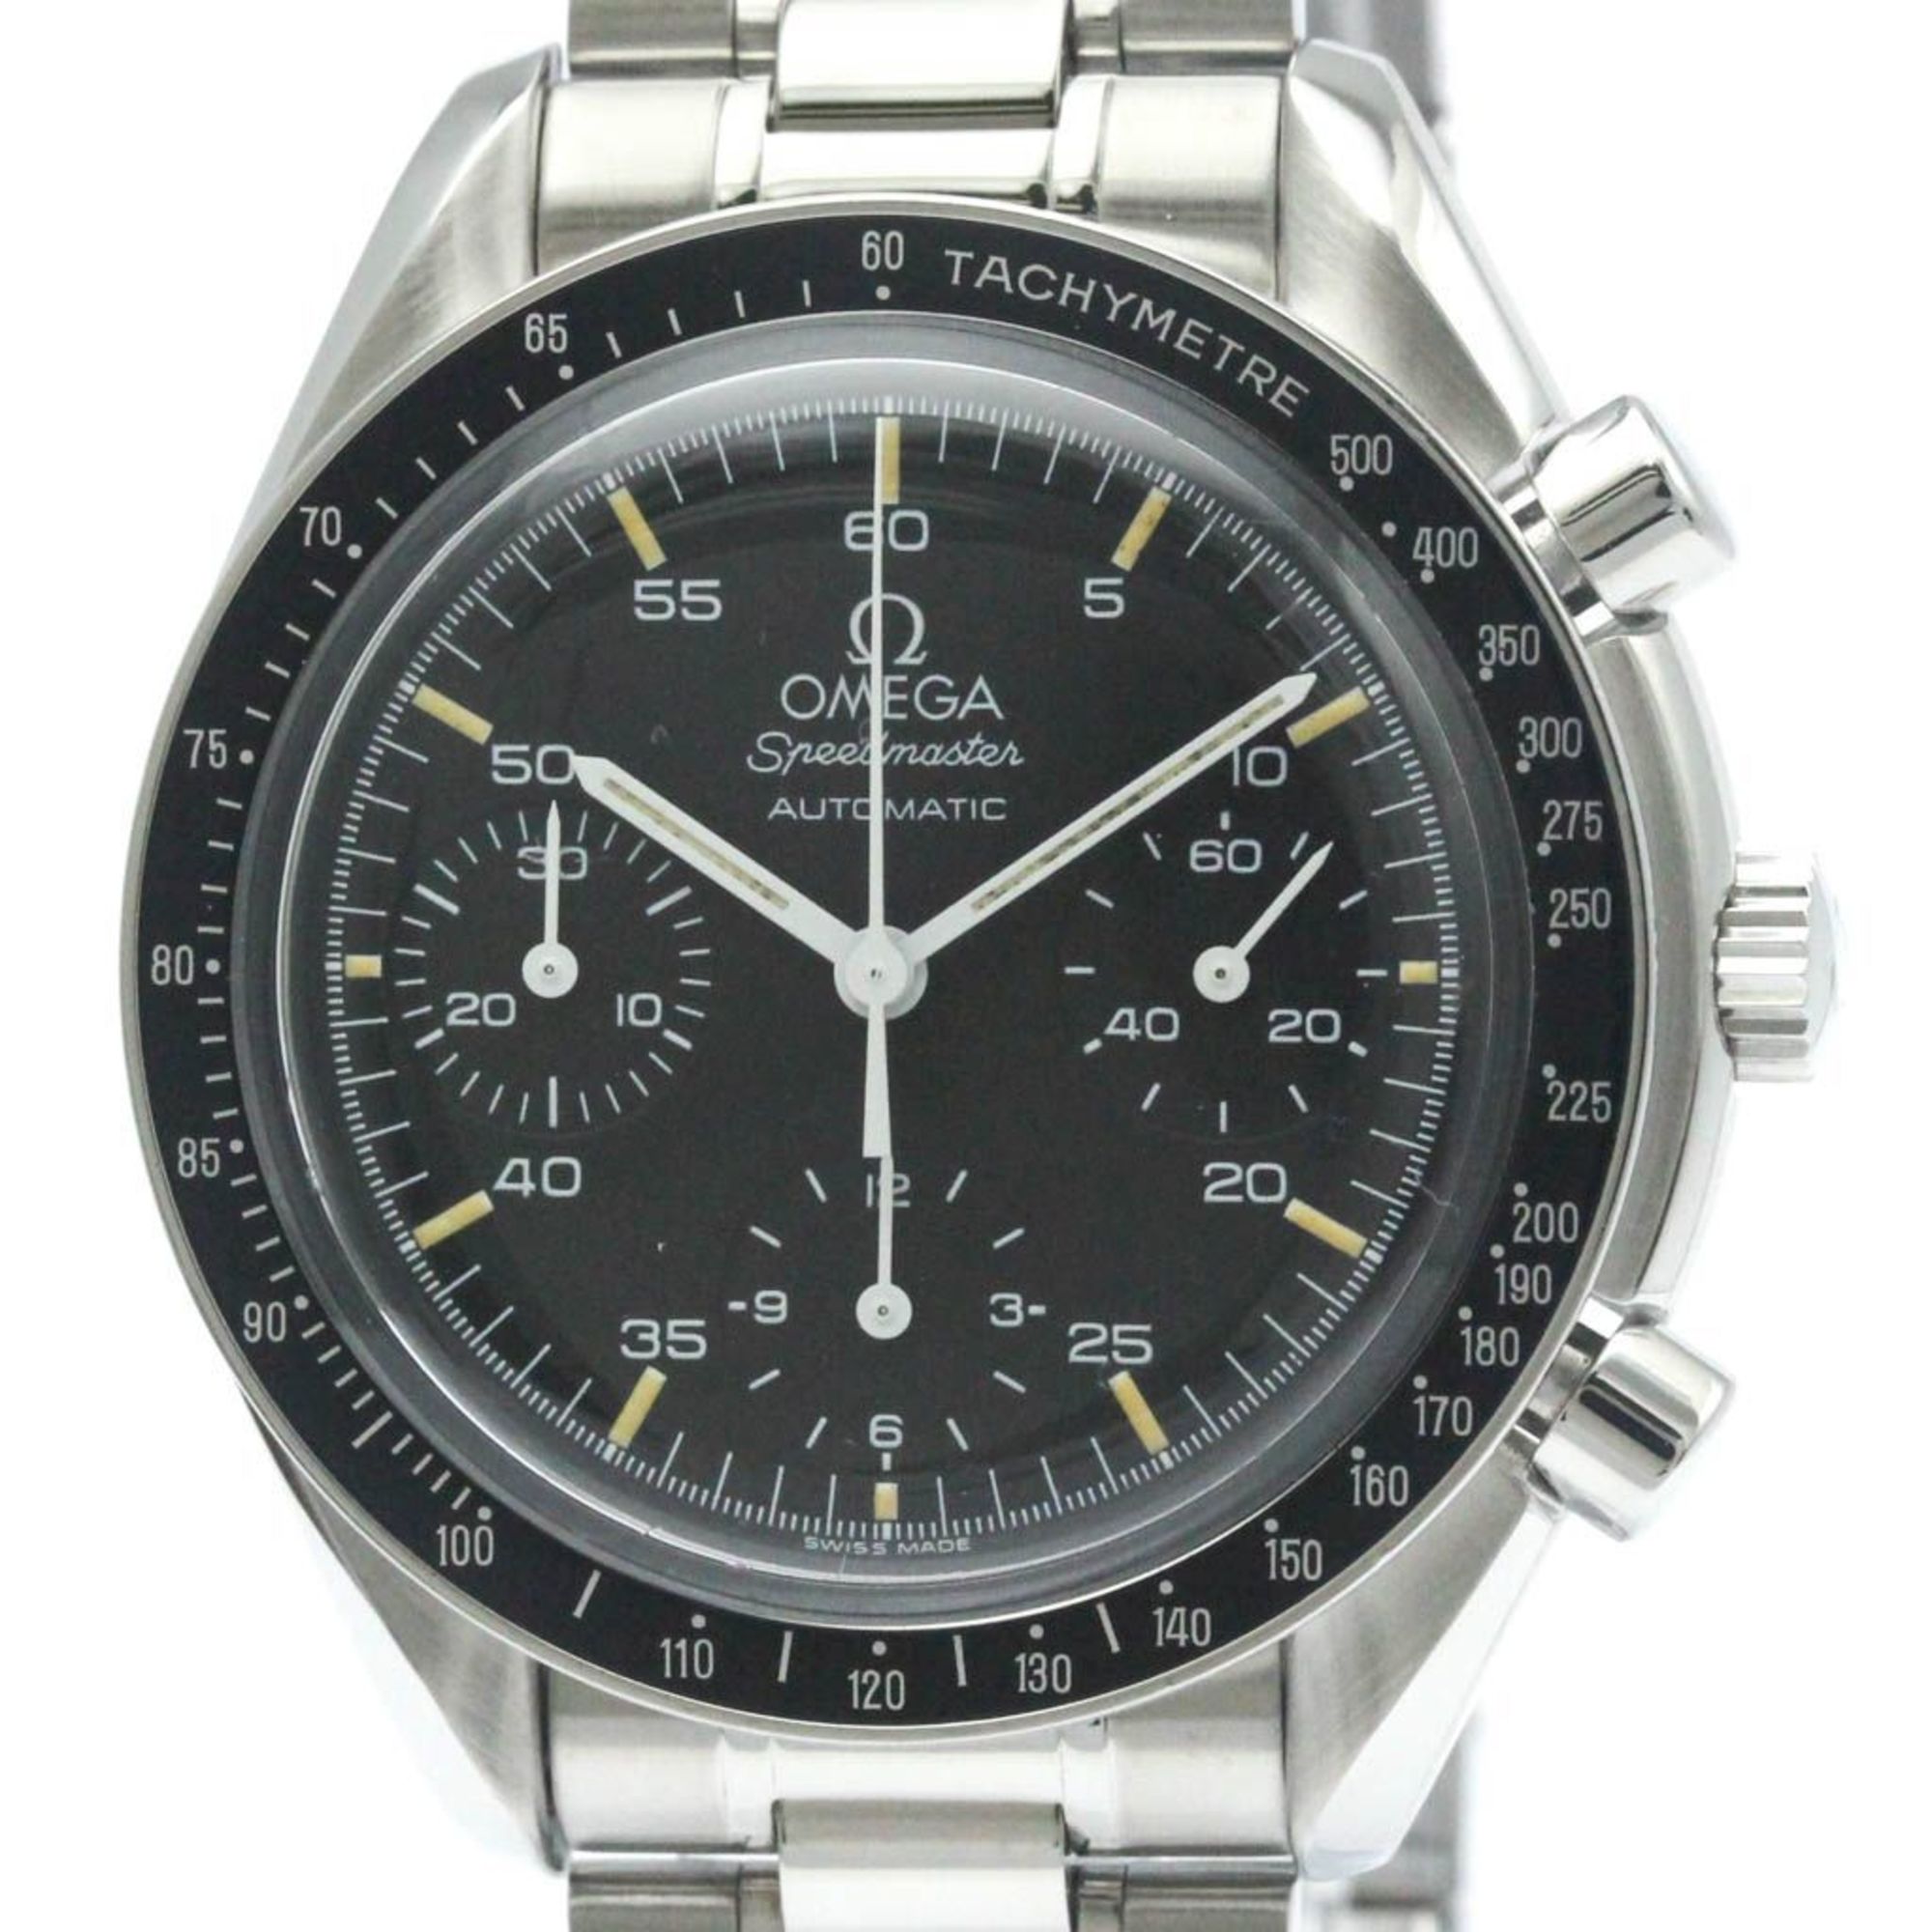 Polished OMEGA Speedmaster Automatic Steel Mens Watch 3510.50 BF567960